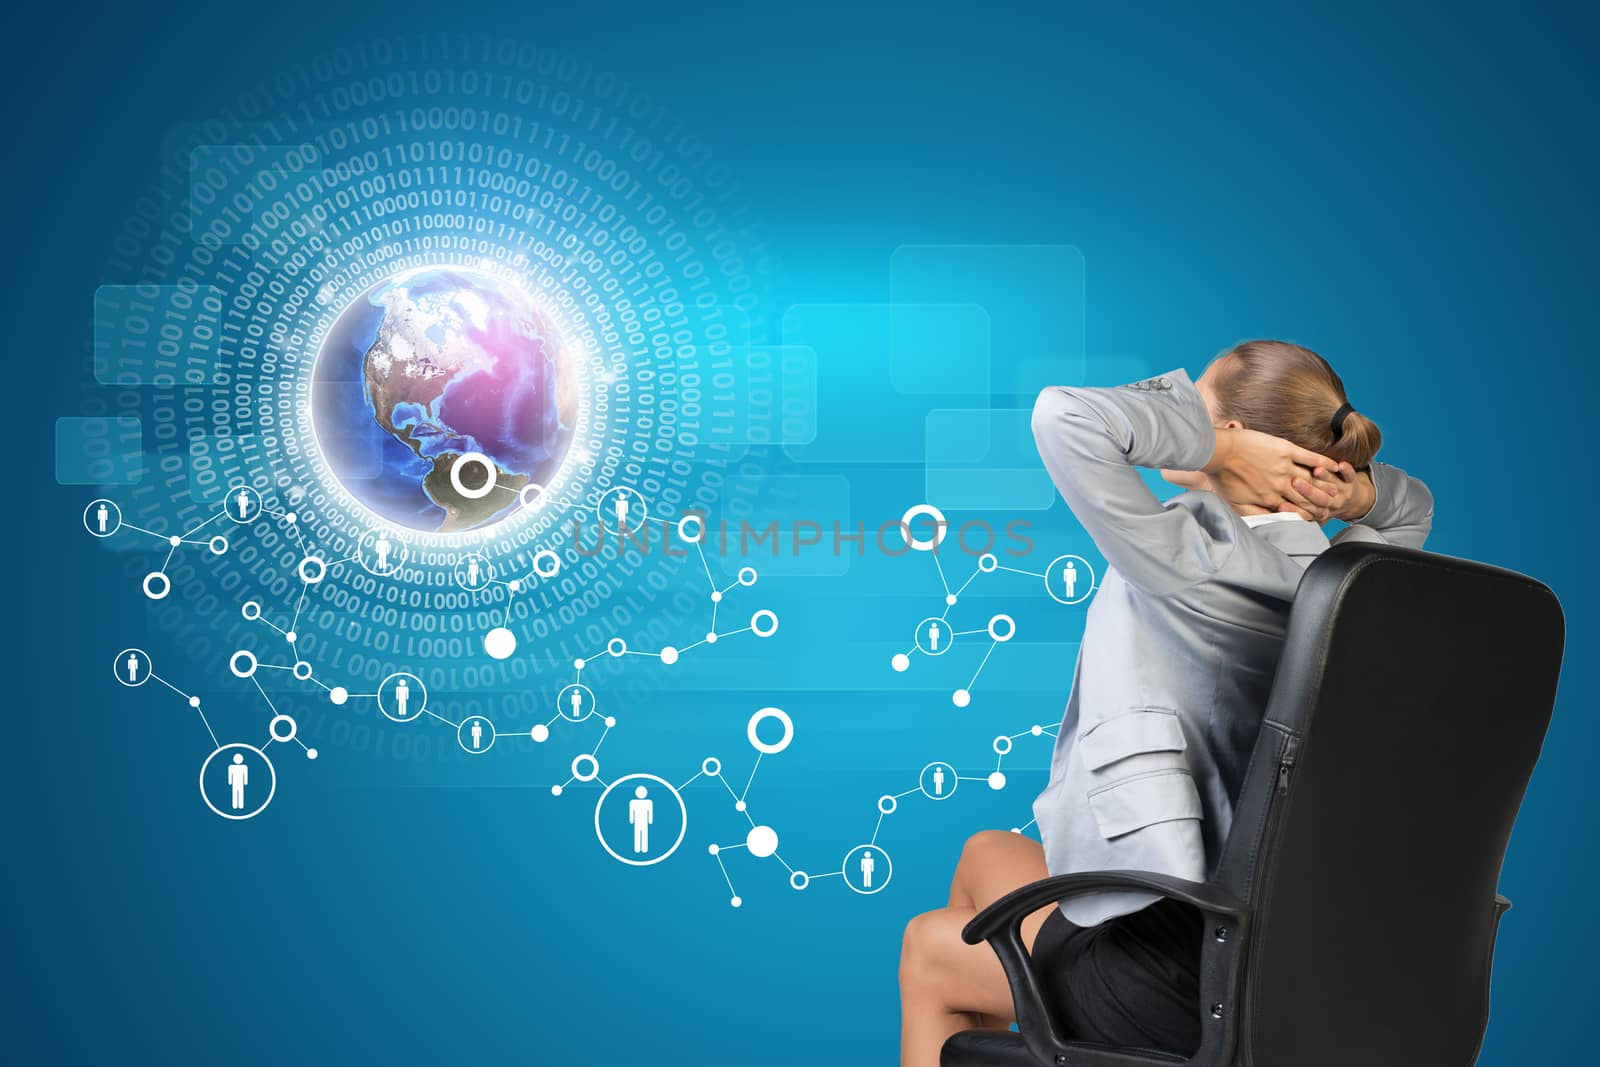 Businesswoman sitting back in office chair with her hands clasped behind her head, looking at Globe with radiant figures and network of person icons on virtual interface. Element of this image furnished by NASA